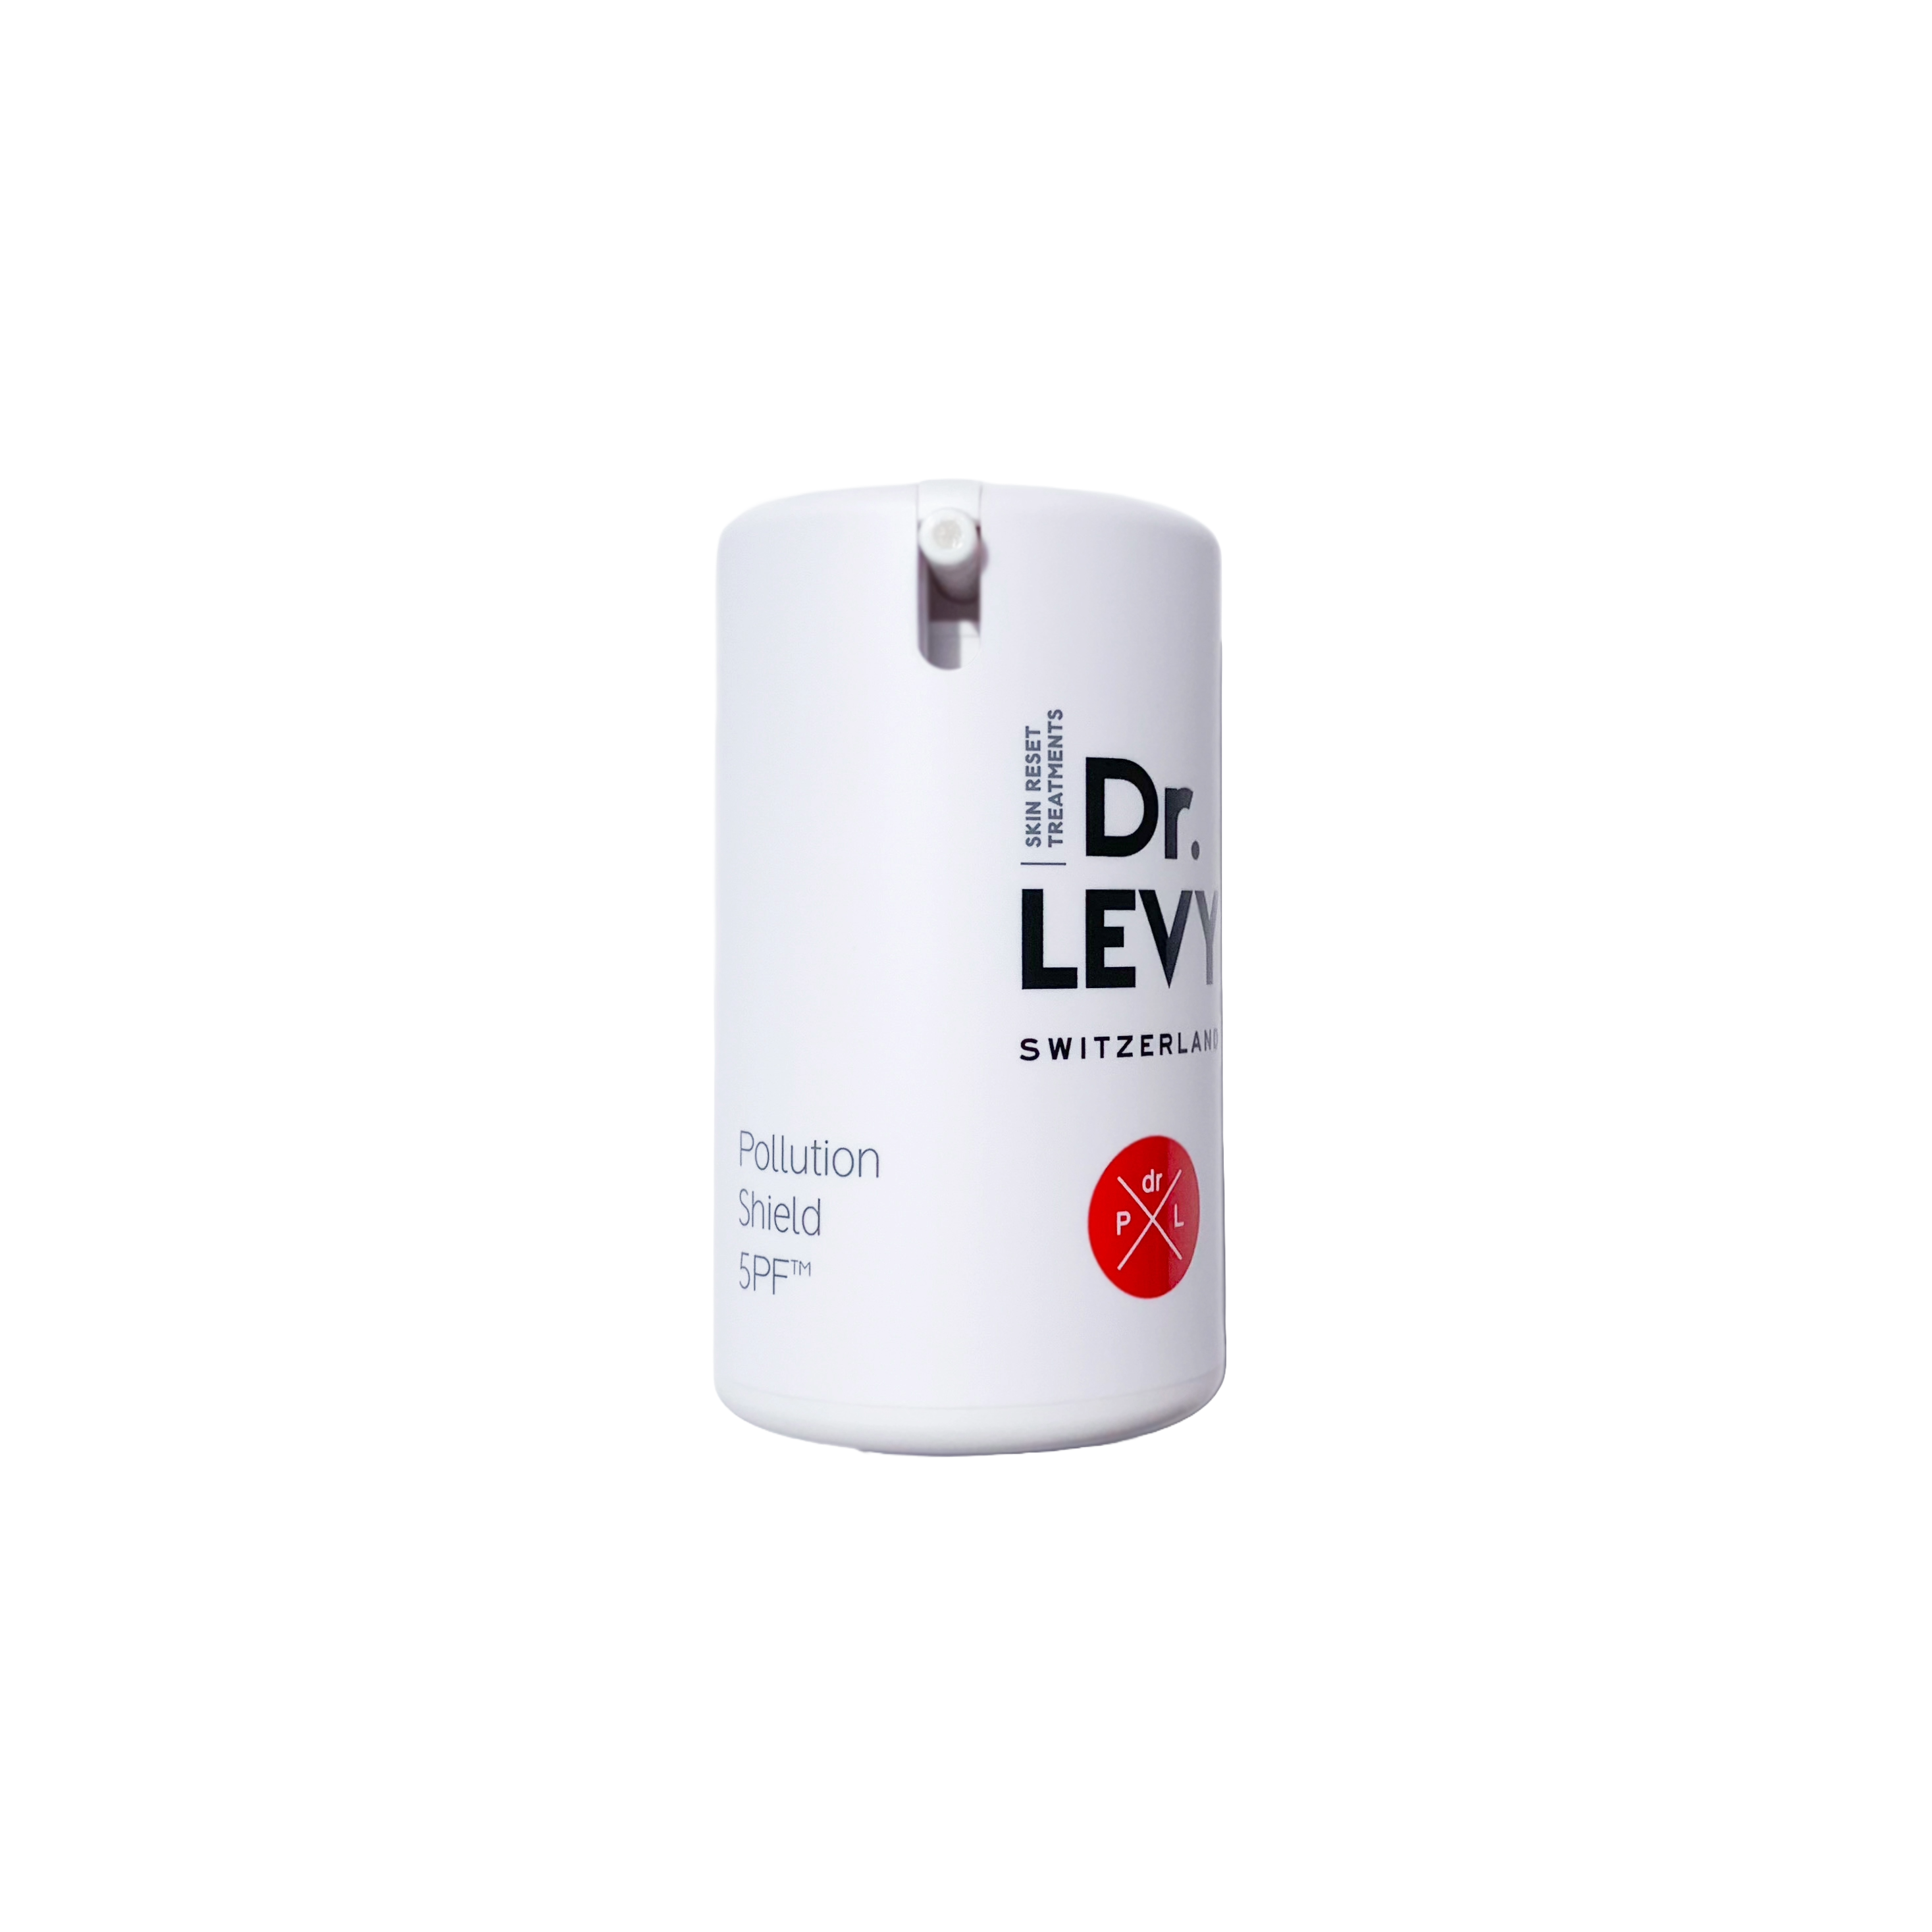 Dr. LEVY | Pollution Shield 5PF (30ml)